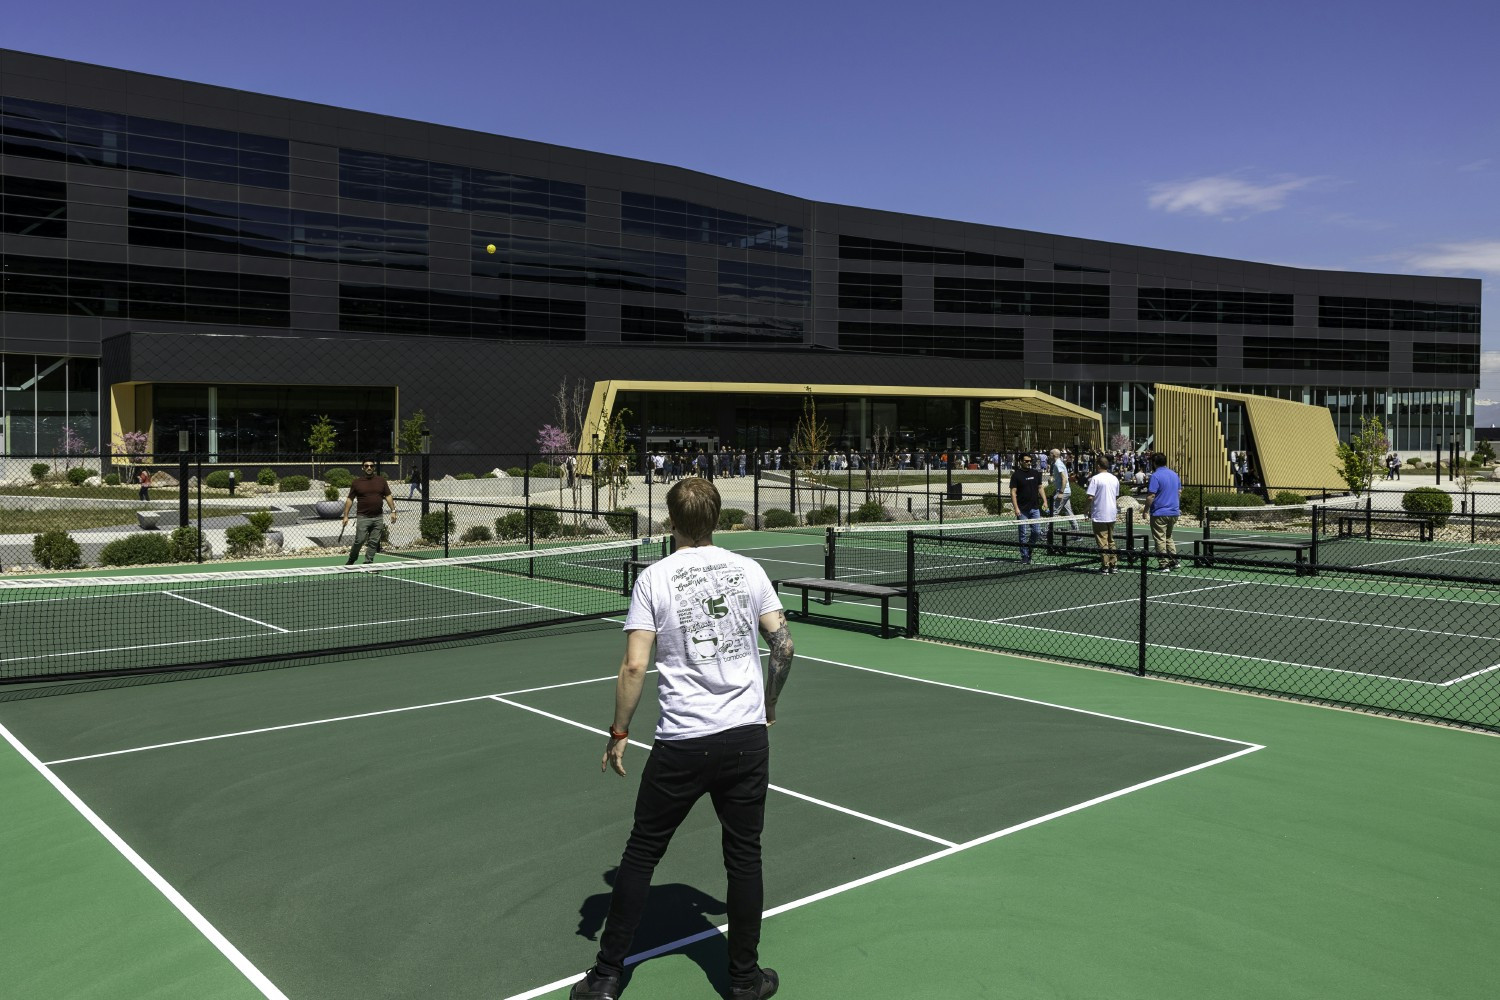 BambooHR has many amenties in their offices including pickleball/basketball courts, full gym, yoga studio and wellness.